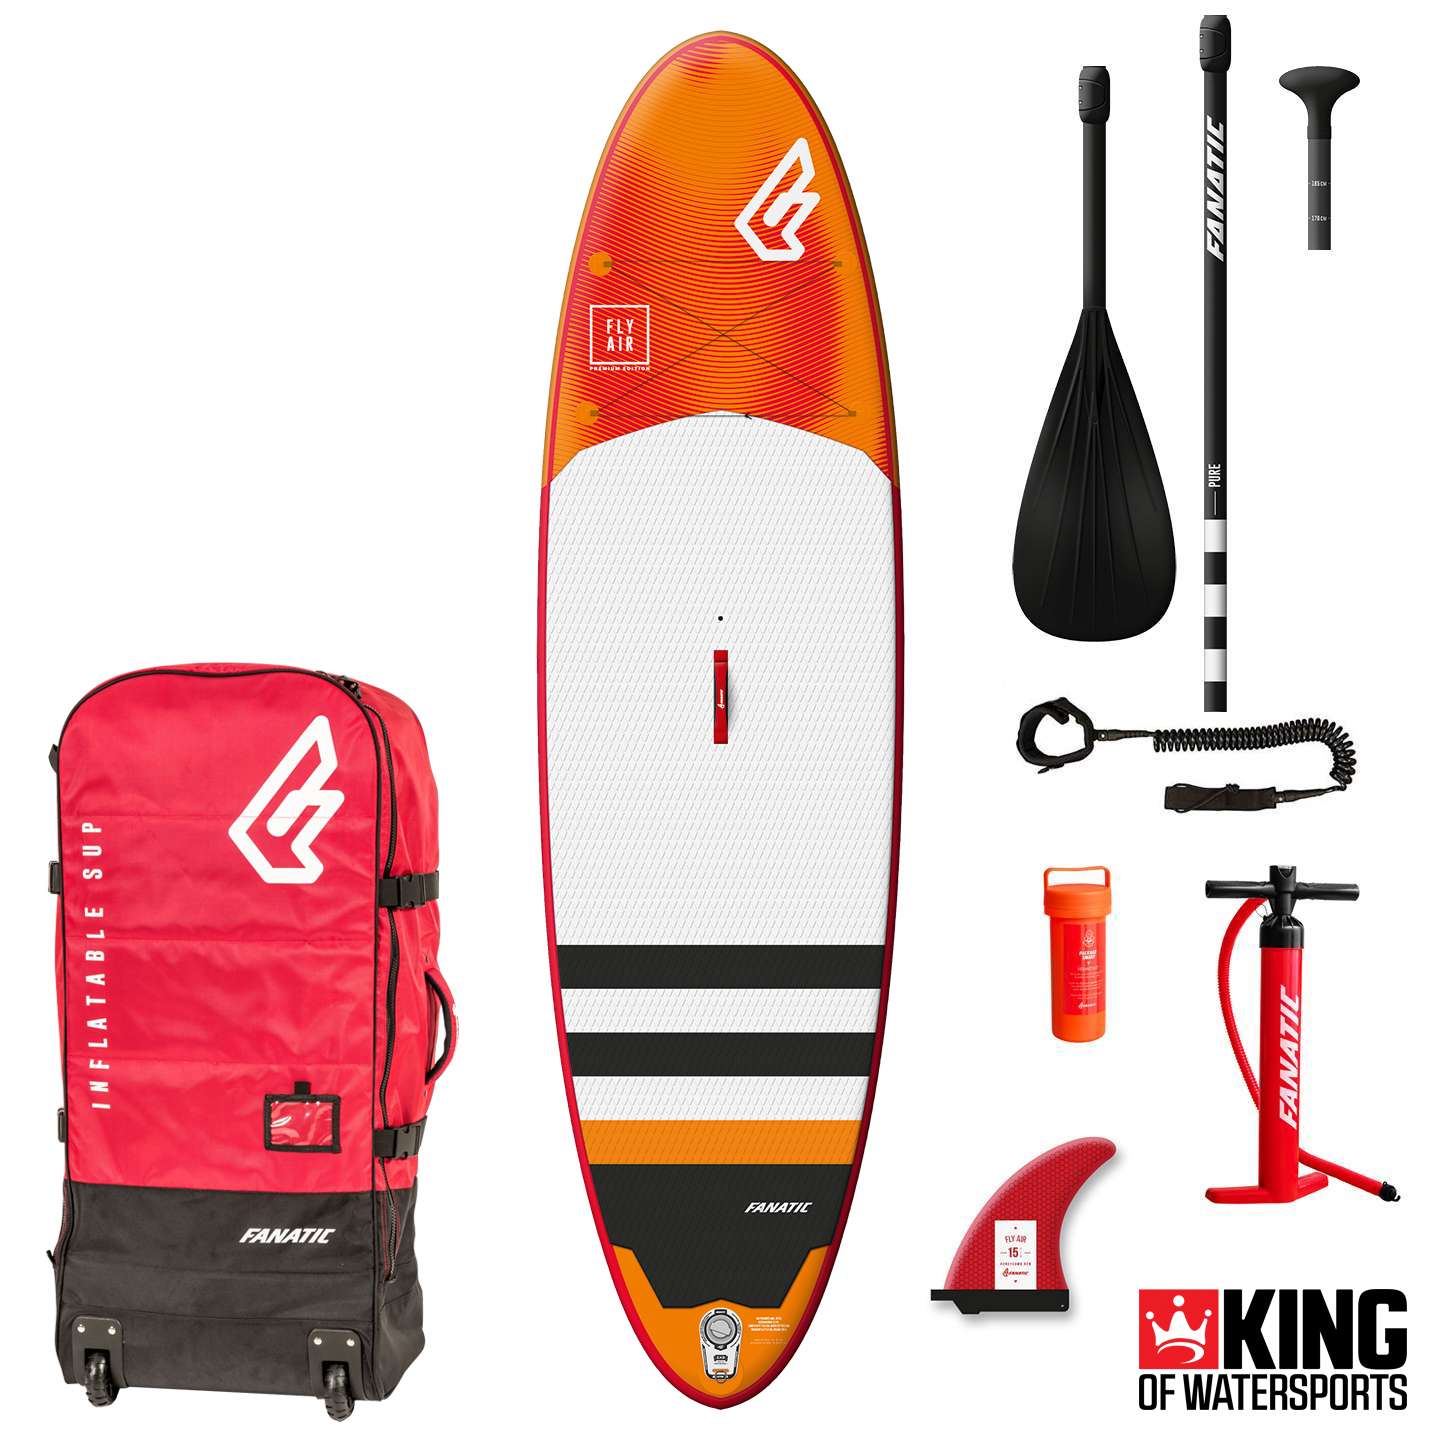 Fanatic Fly Air inflatable 10.8 SUP Stand up Paddle Board Surfboard 